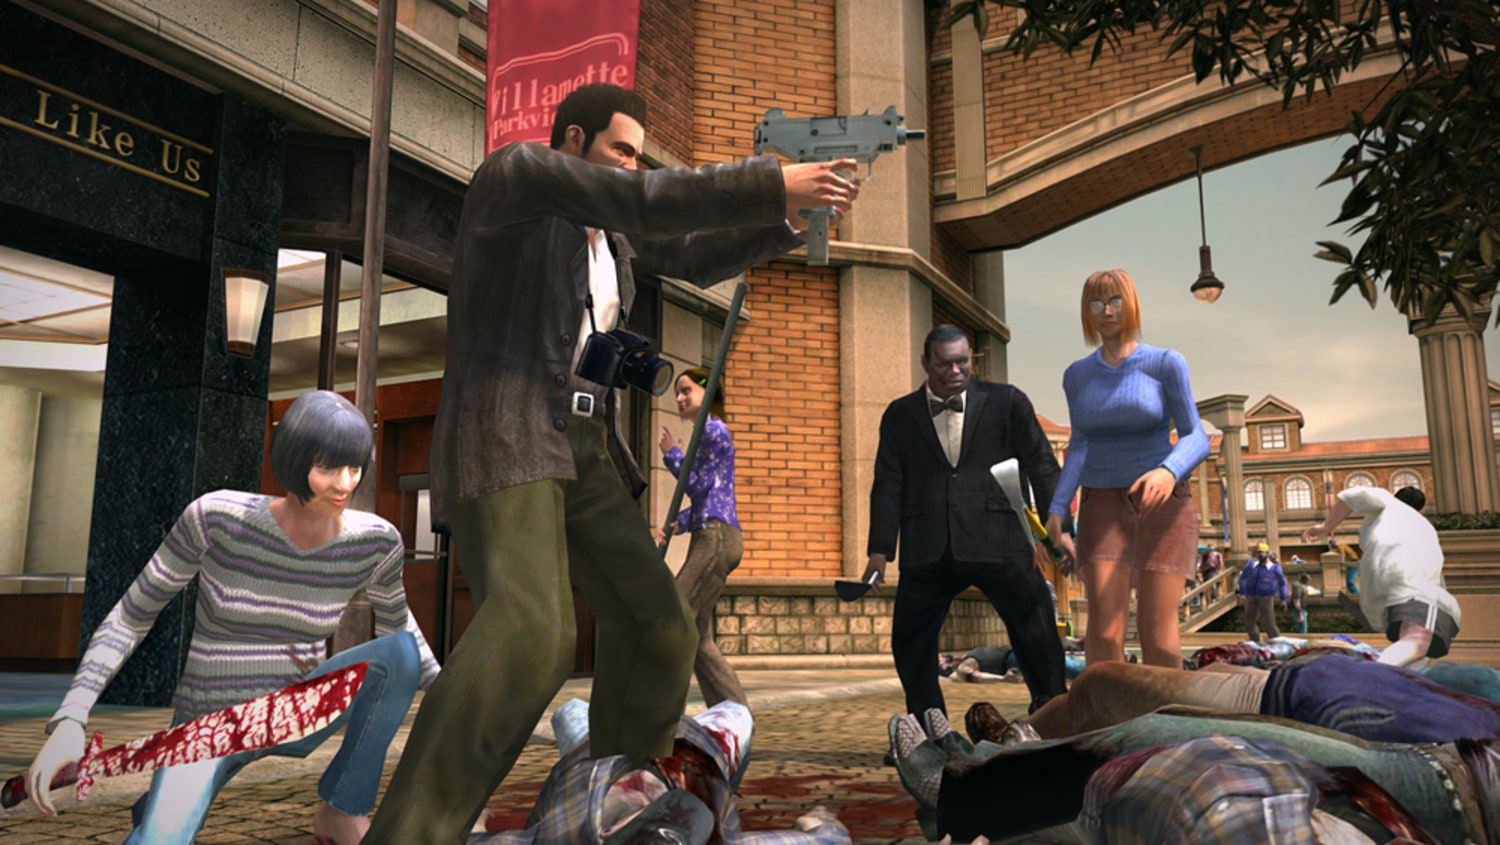 Dead Rising Collection, Dead Rising Wiki